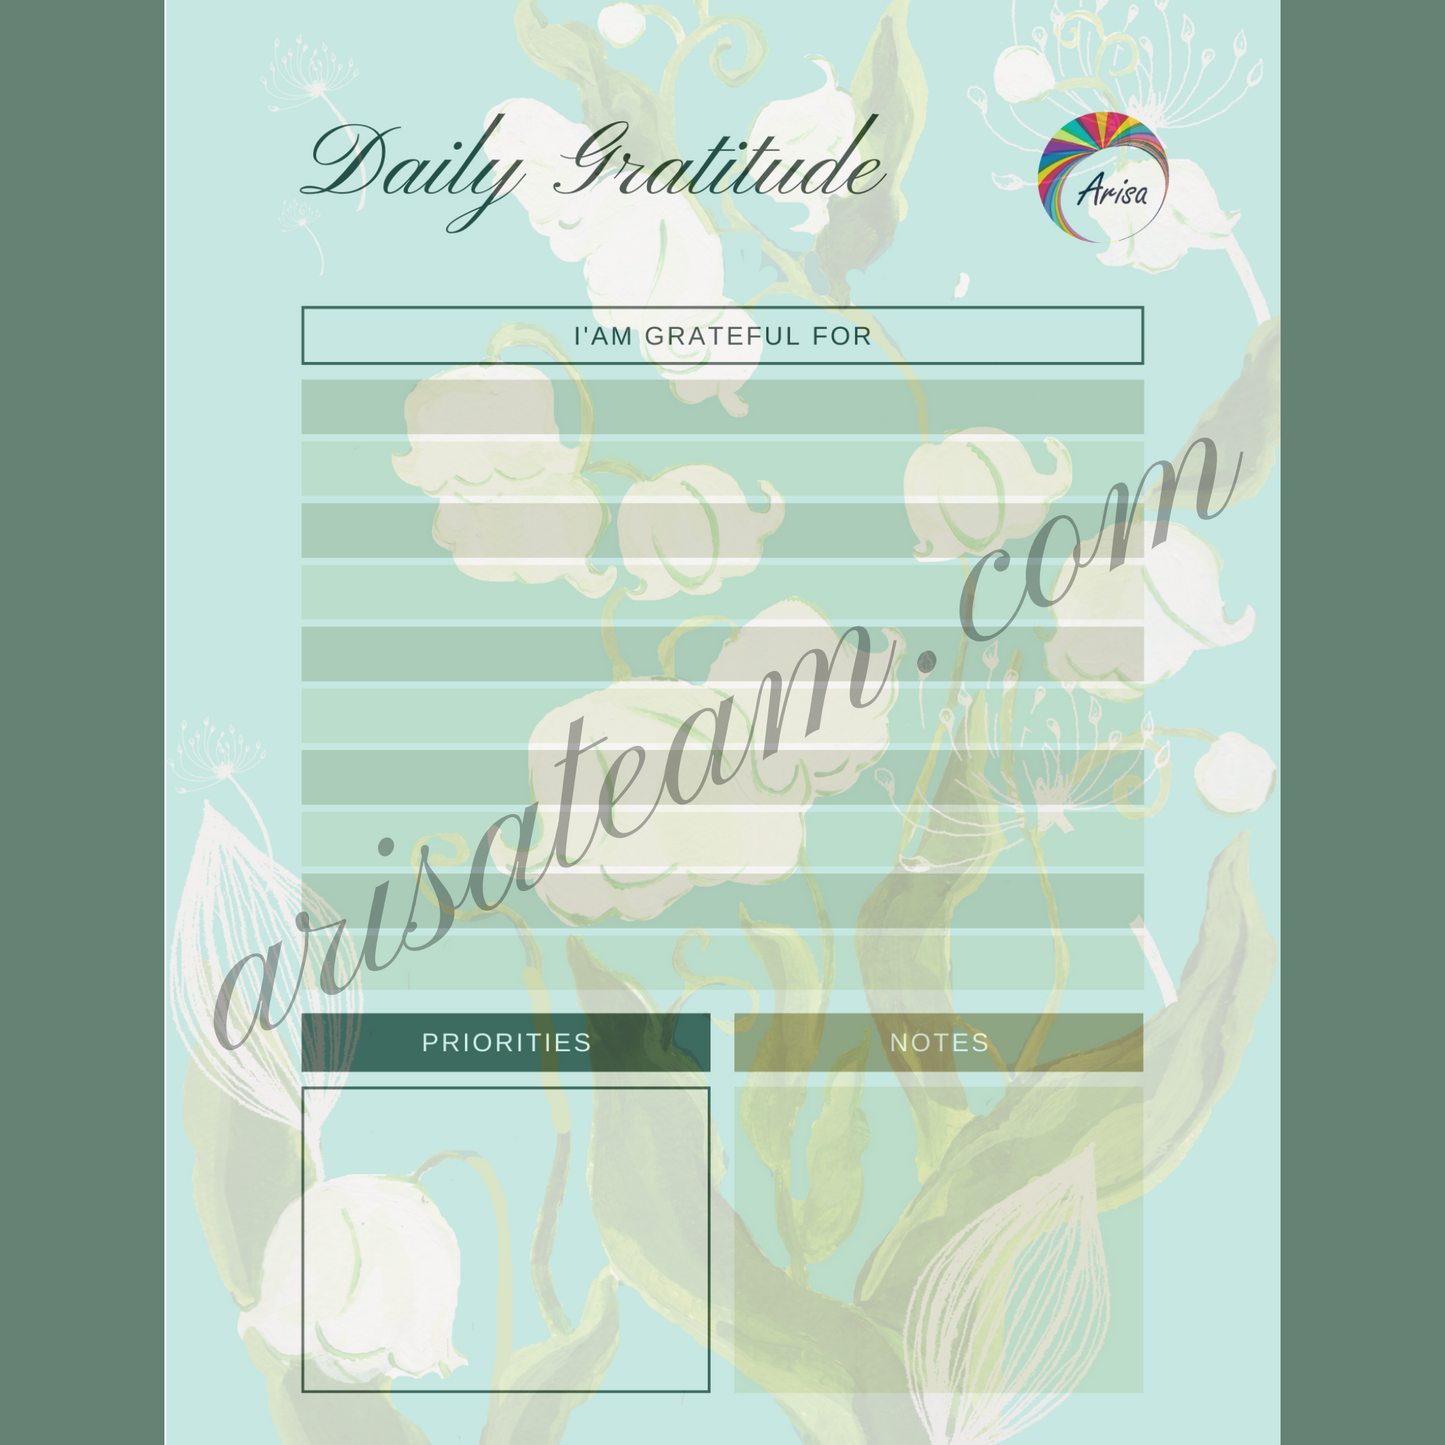 The "Daily Gratitude" page of the "Lily of The Valley" wellness planner pack by Arisateam